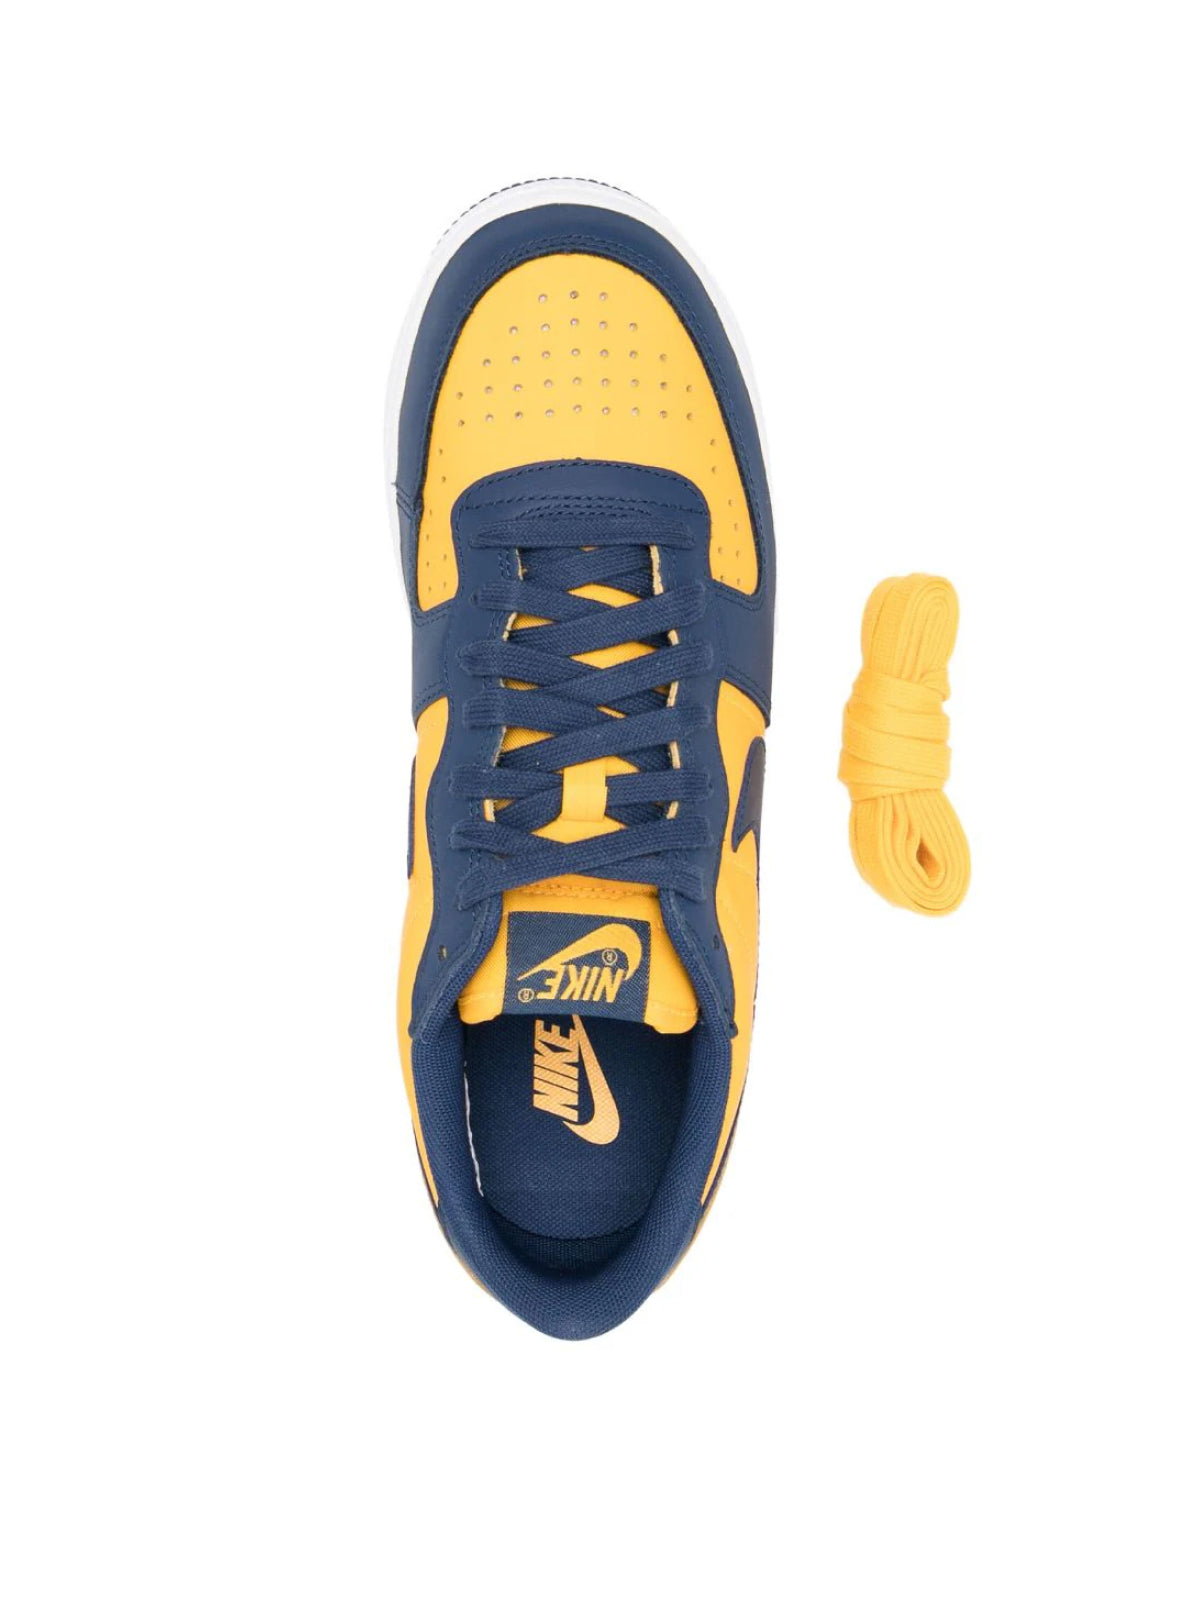 Nike-OUTLET-SALE-Terminator Low 'Michigan' Sneakers-ARCHIVIST